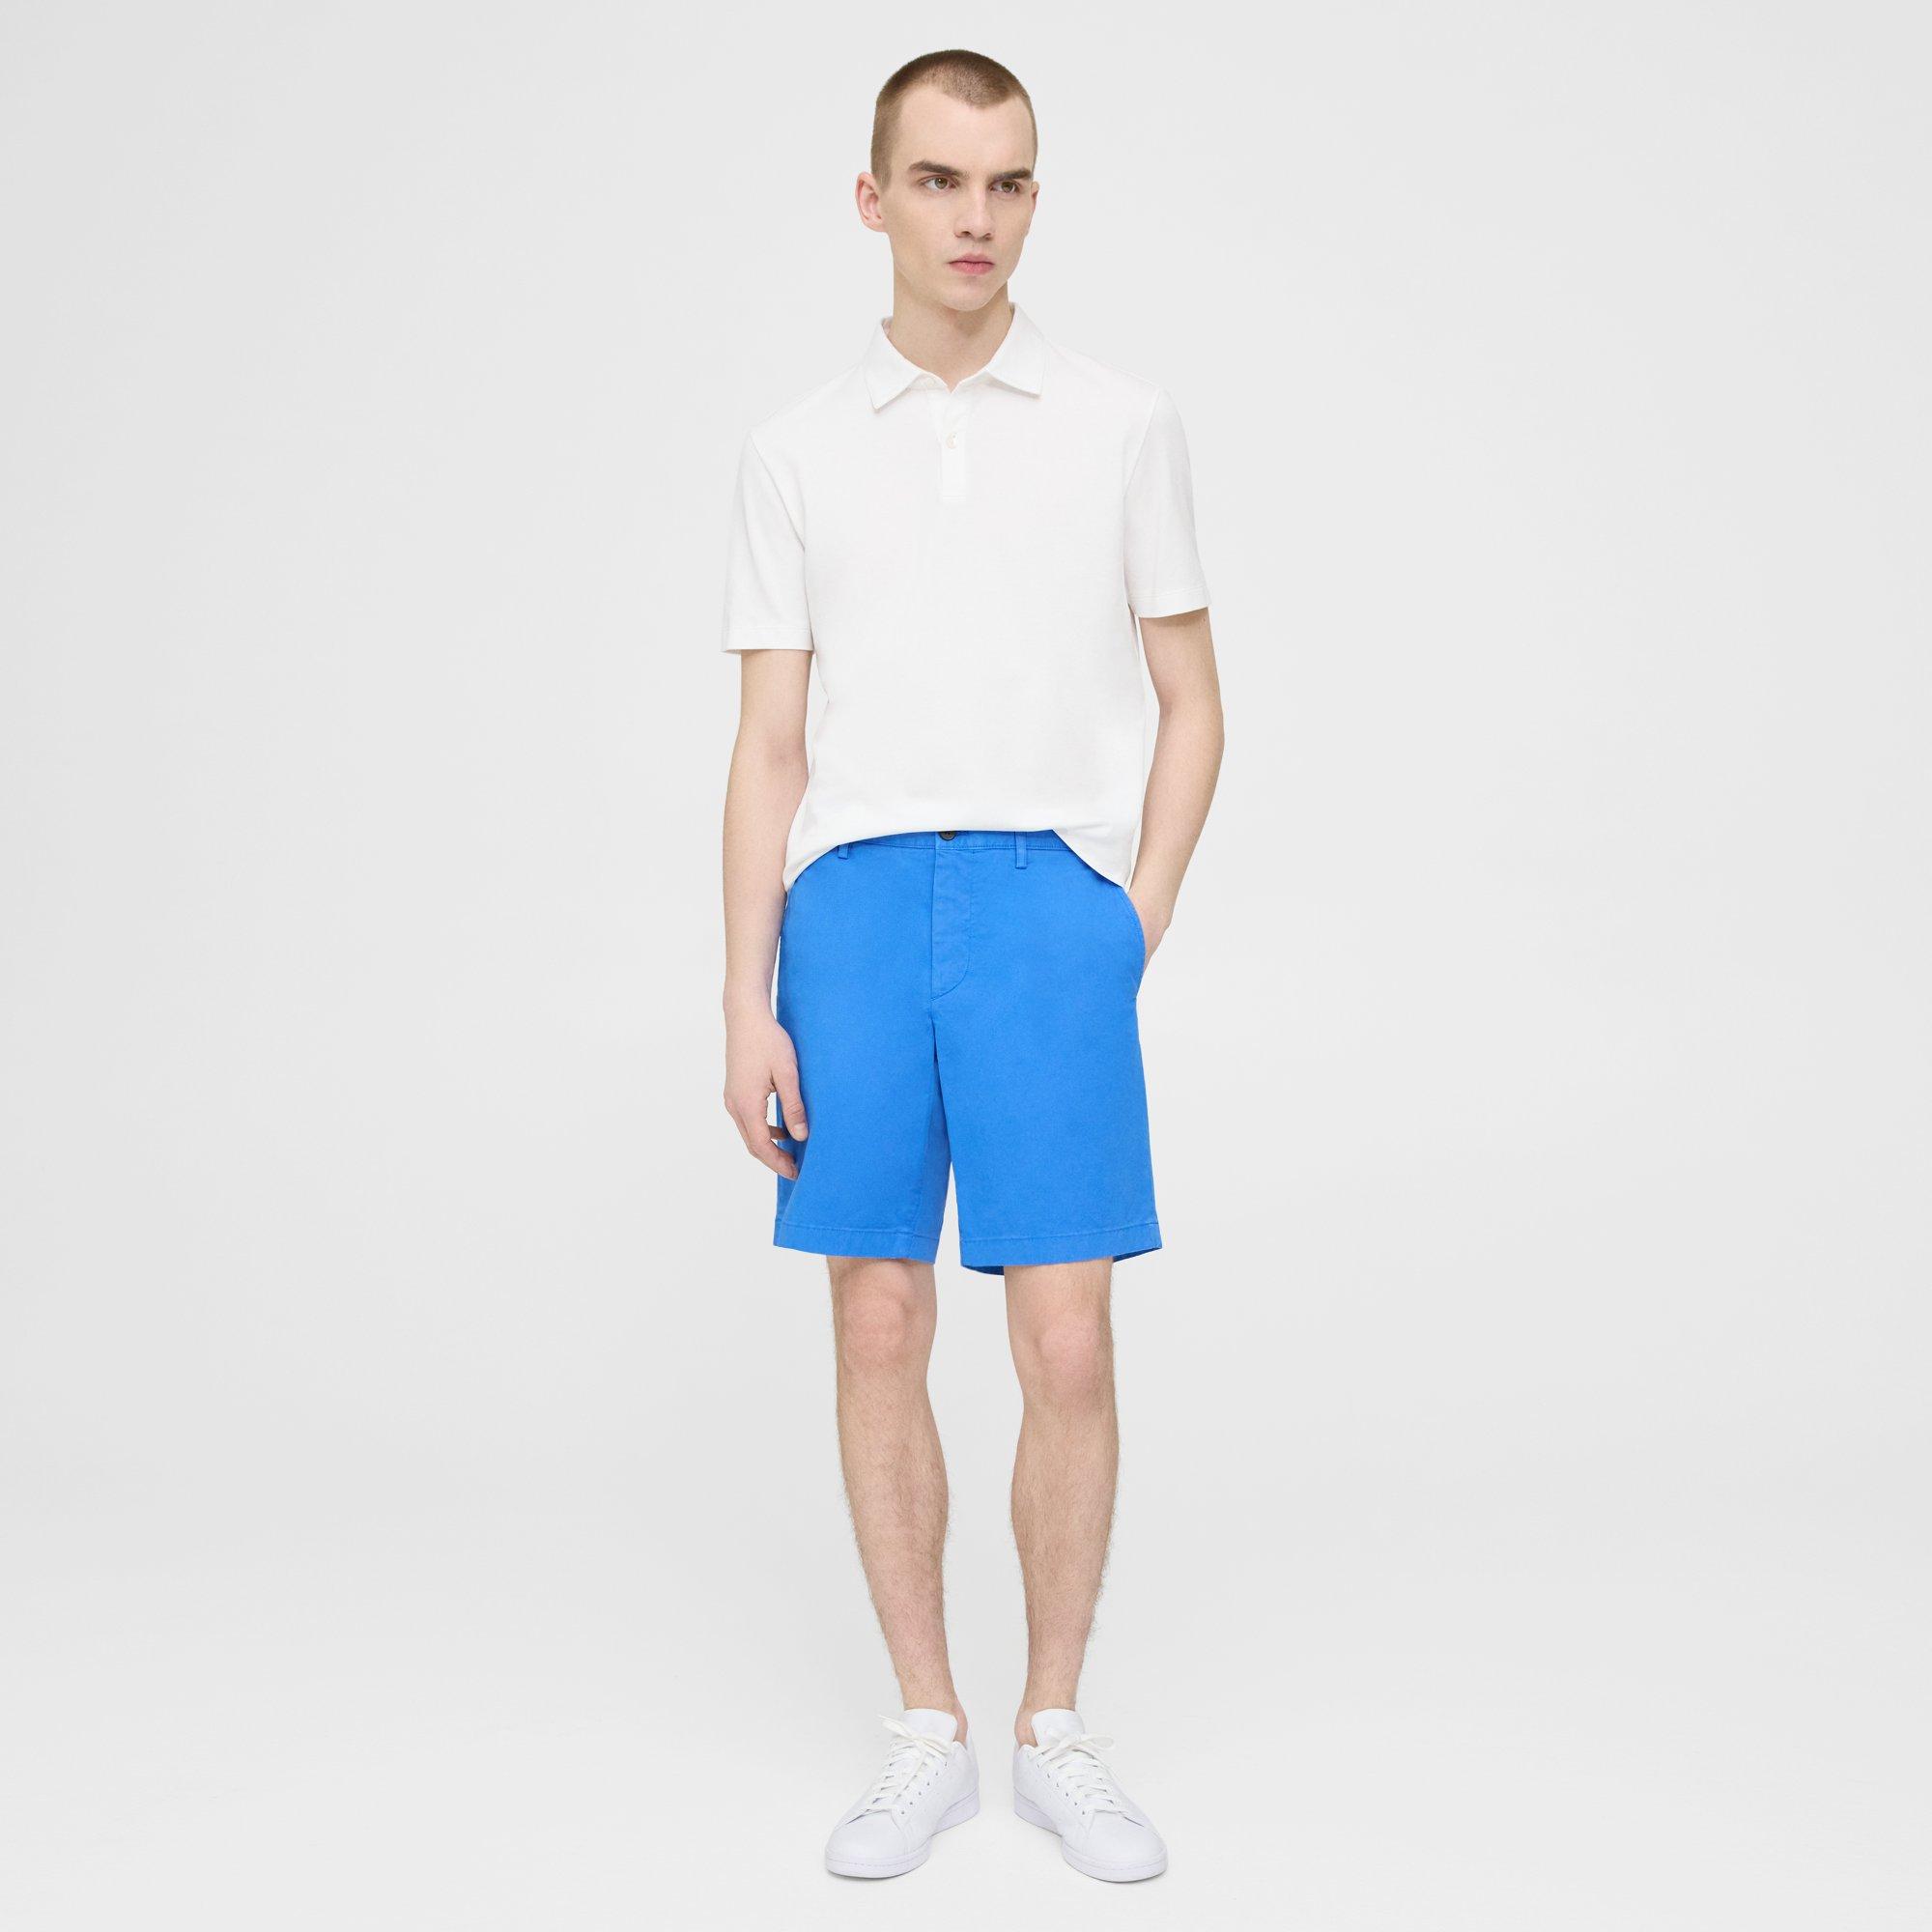 Theory Zaine Gd S9 Patton Shorts In Palace Blue